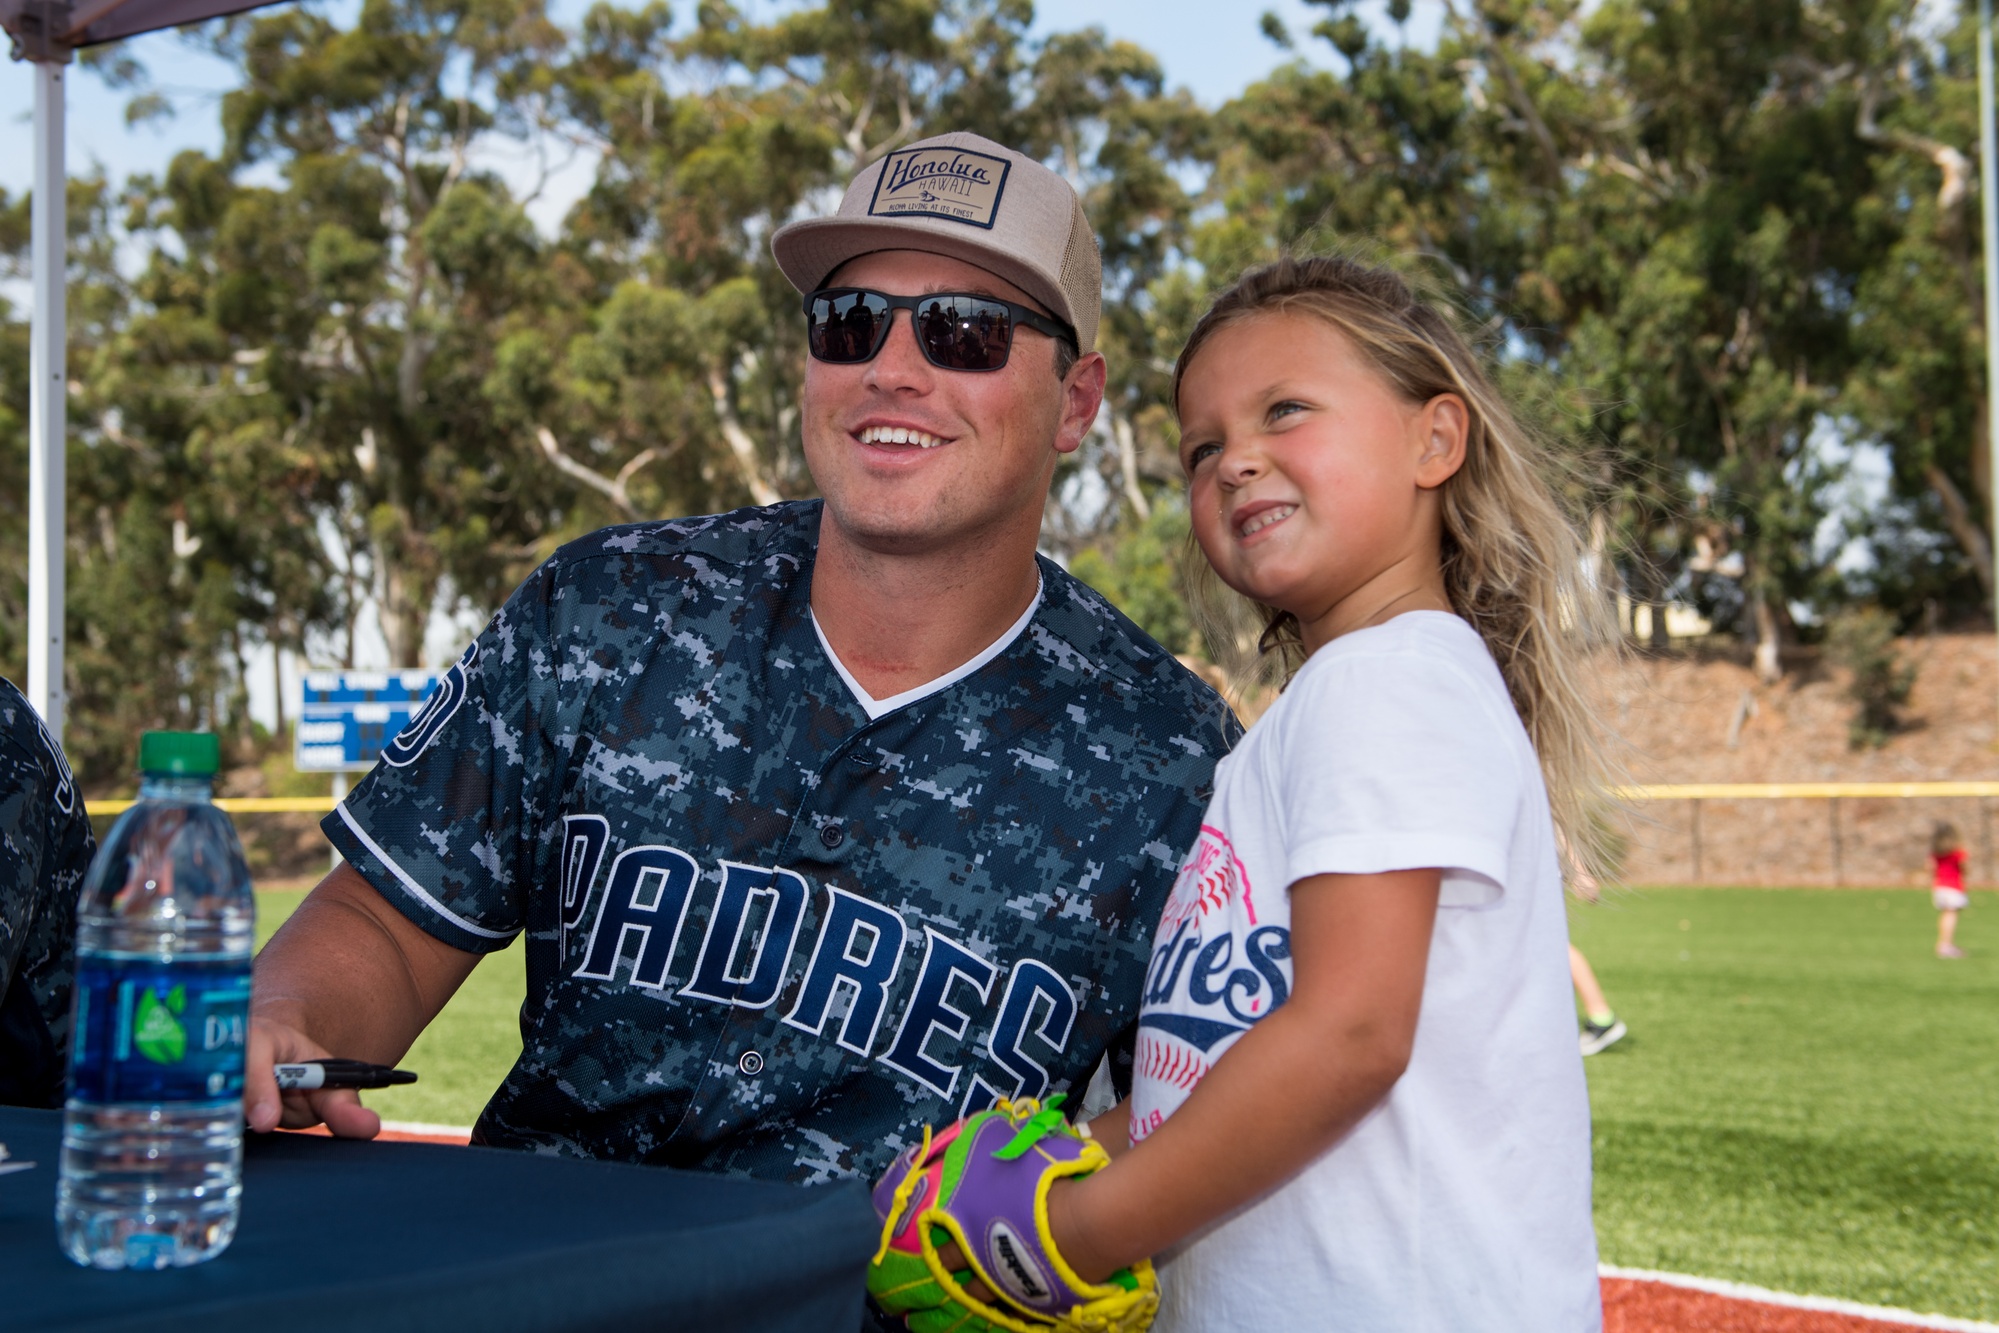 Outfielder Hunter Renfroe of the San Diego Padres poses for a